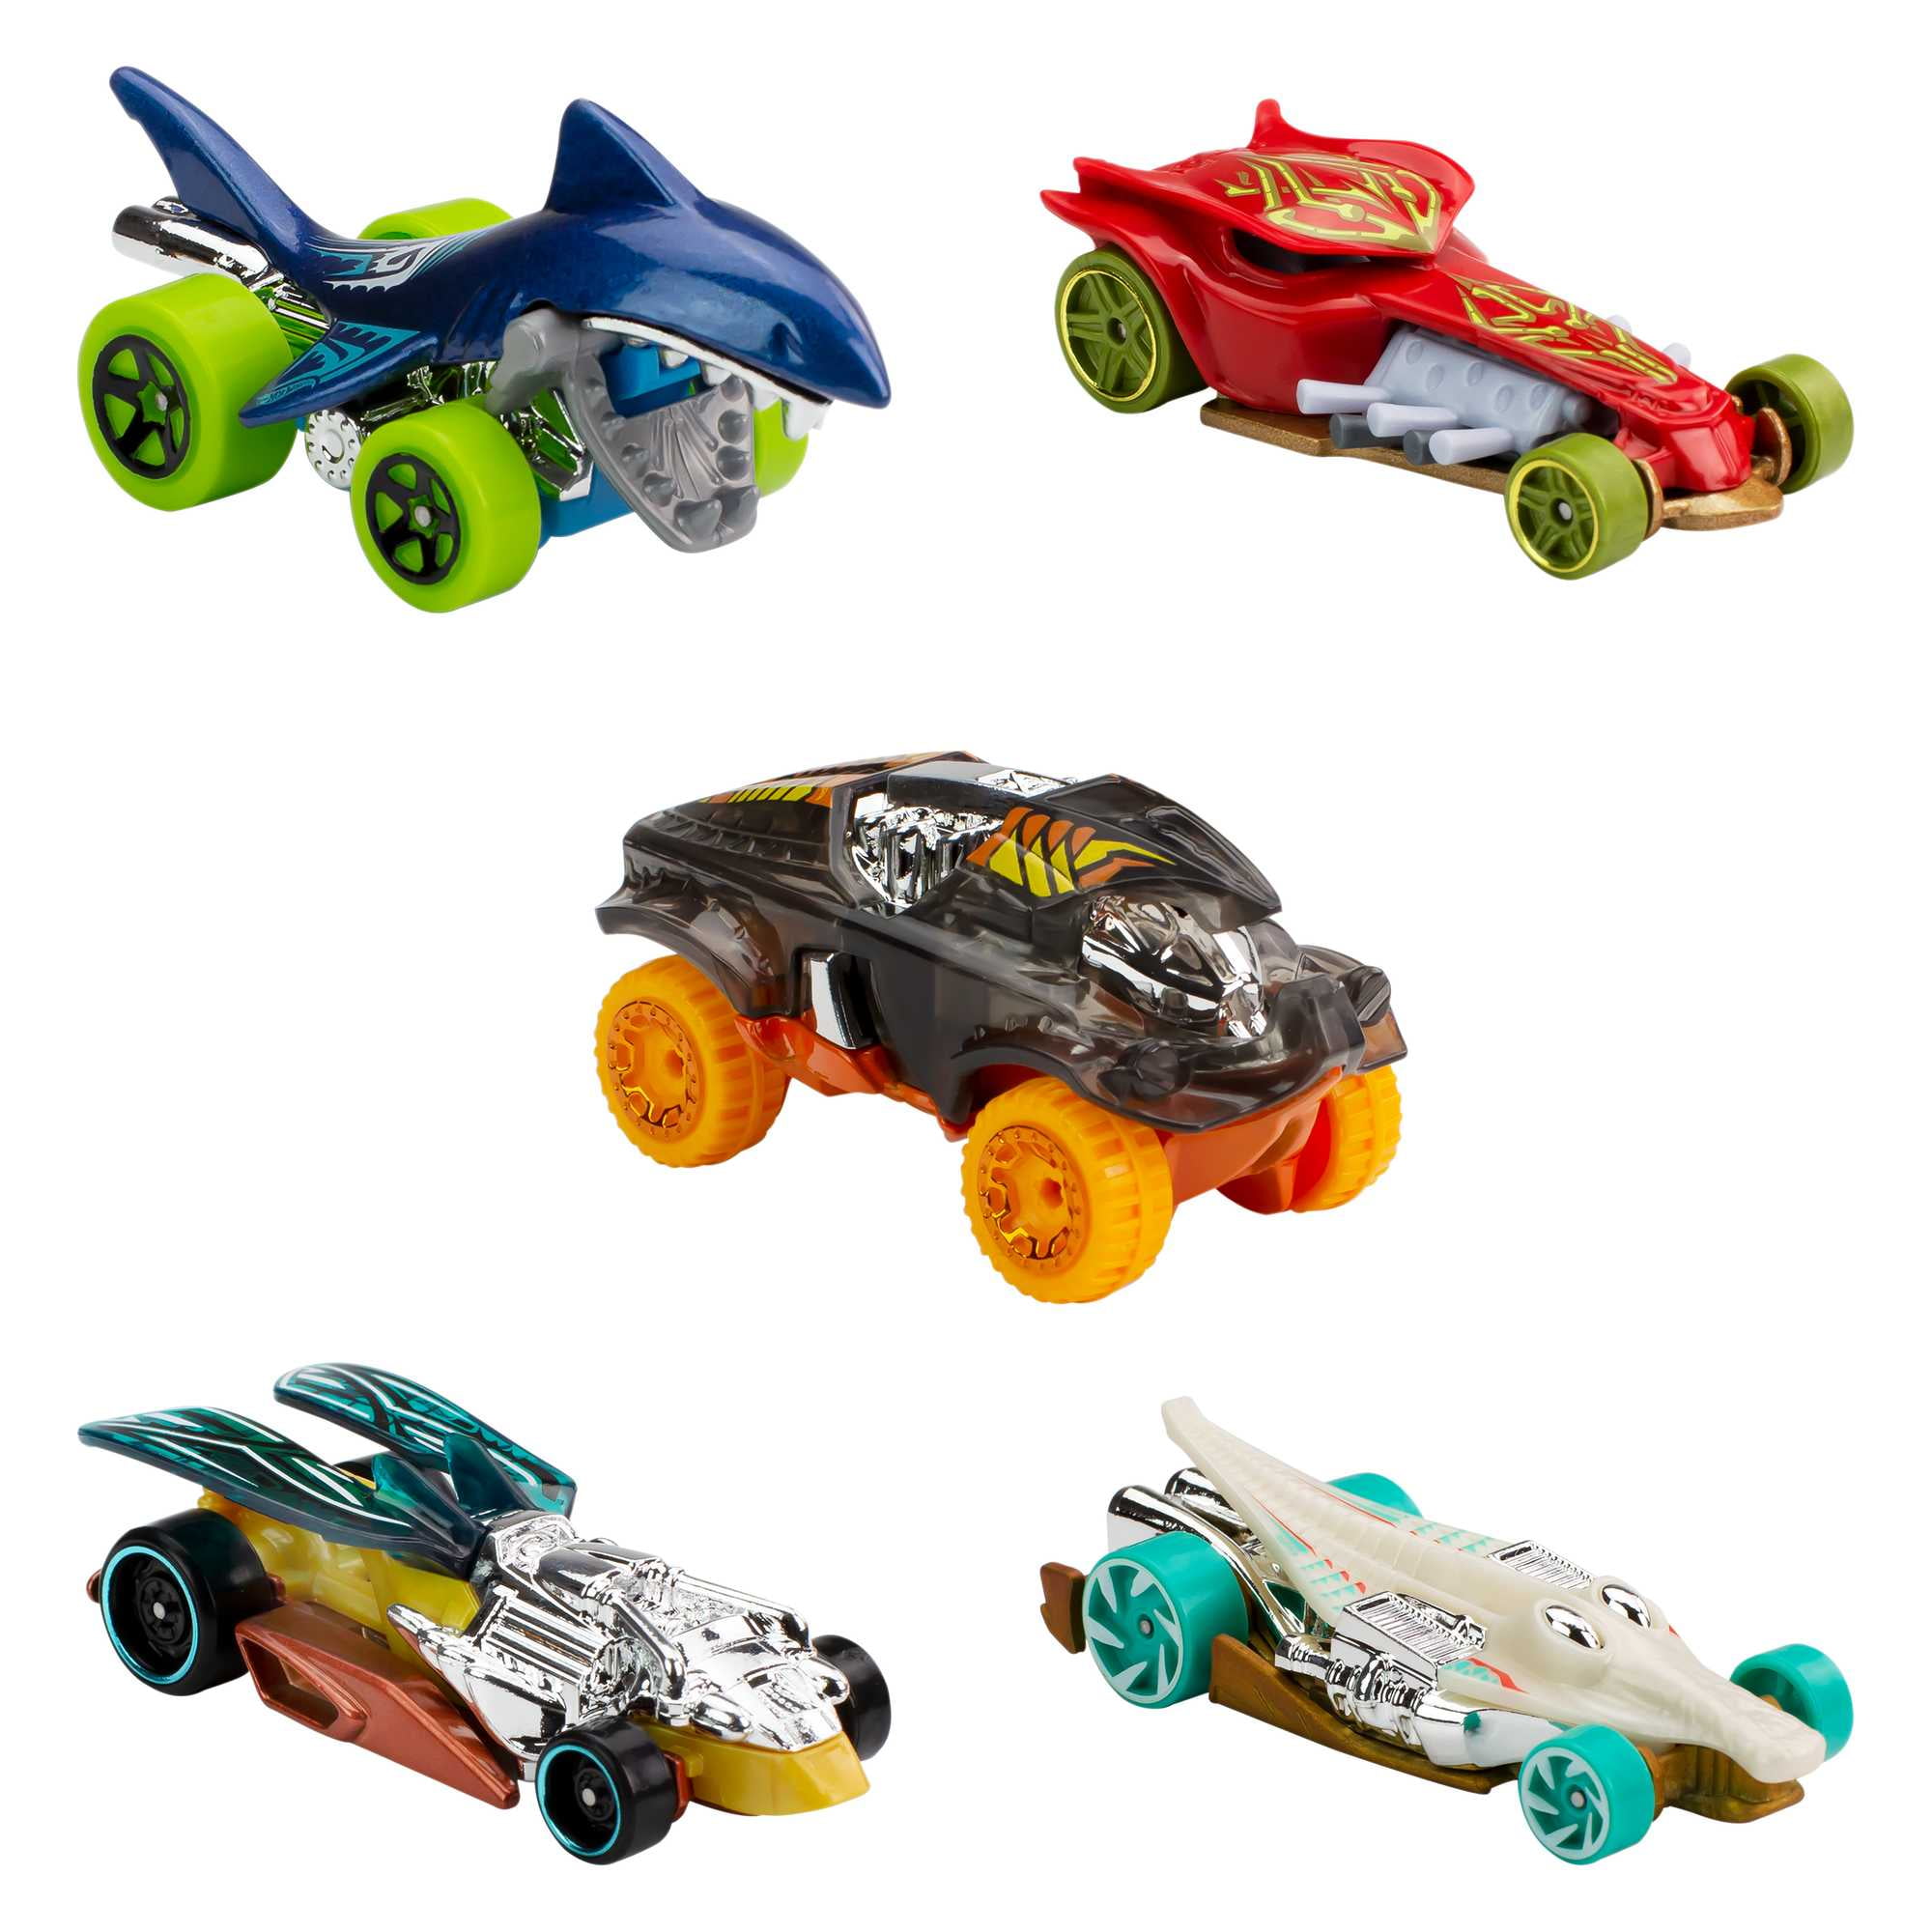 Hot Wheels 5-Car Pack of 1:64 Scale Vehicles, Collectible Toy Cars